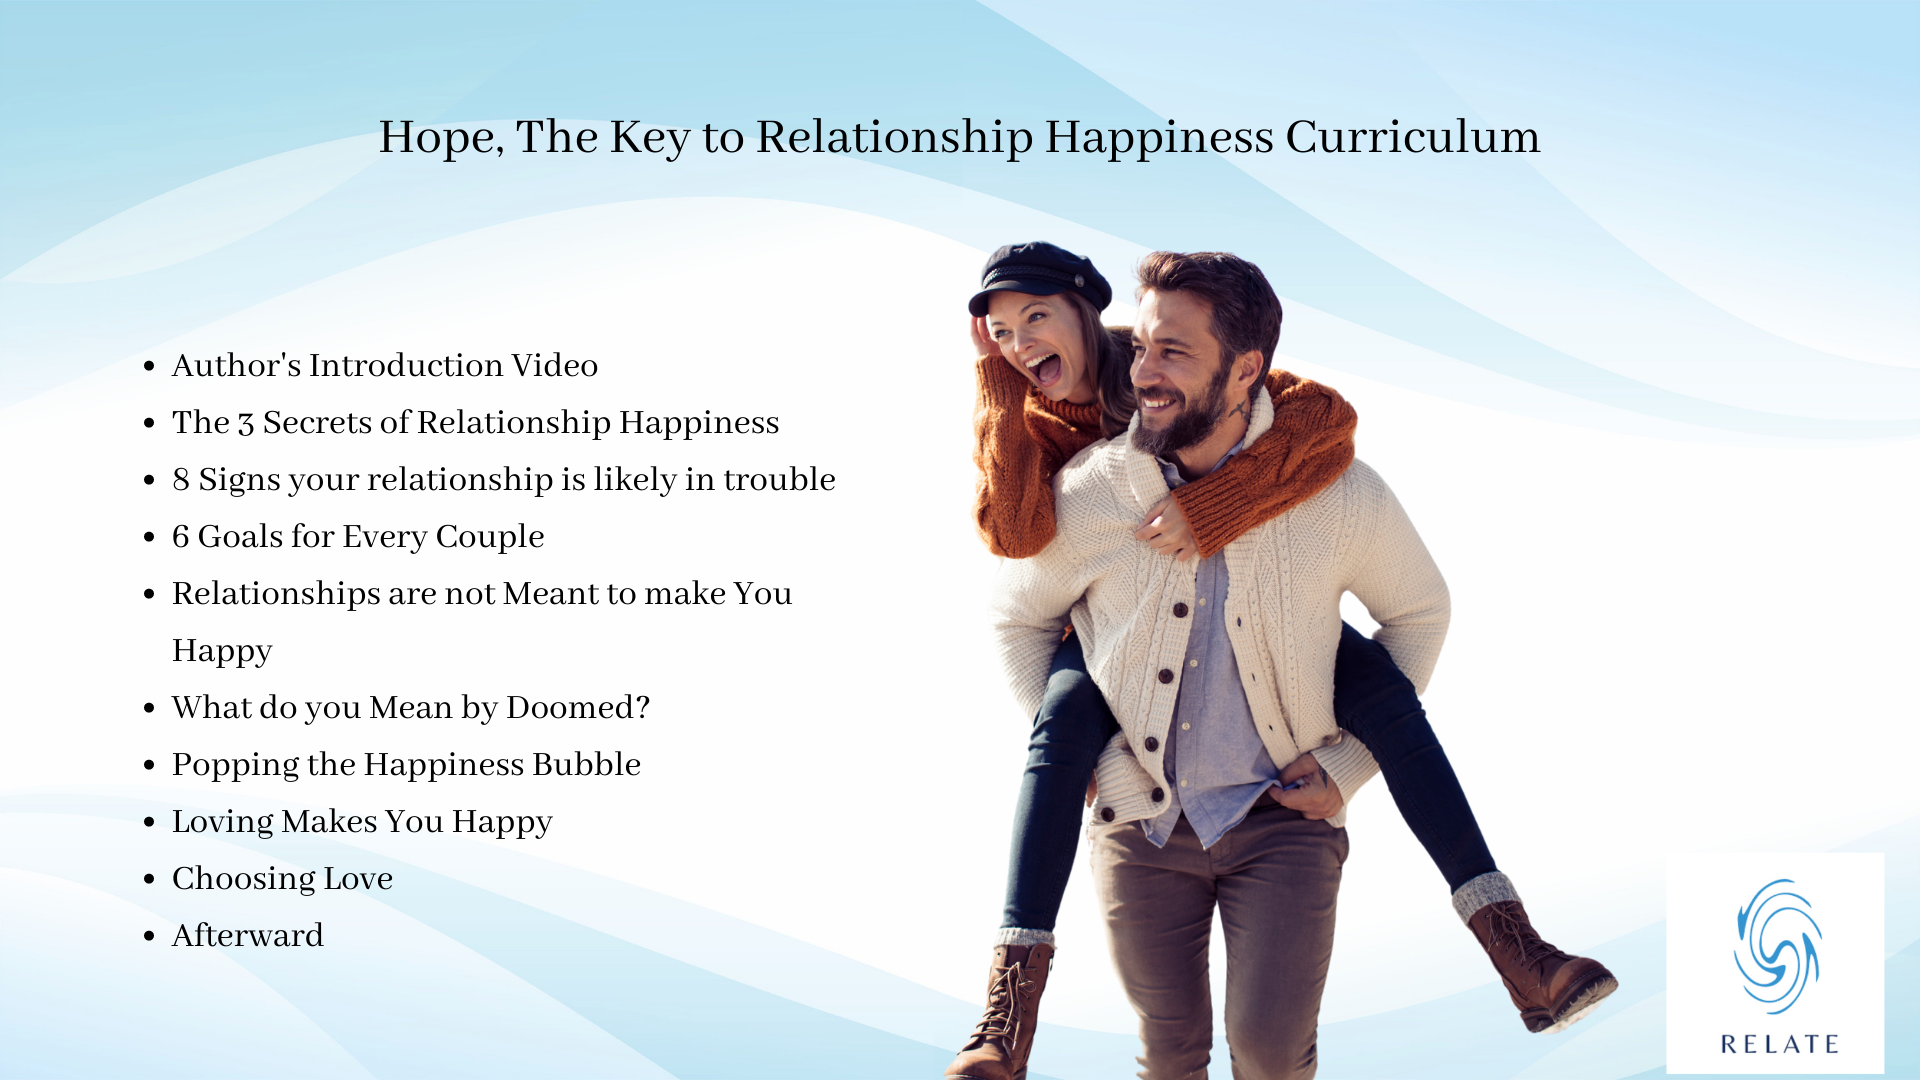 Hope - The Key to Relationship Happiness